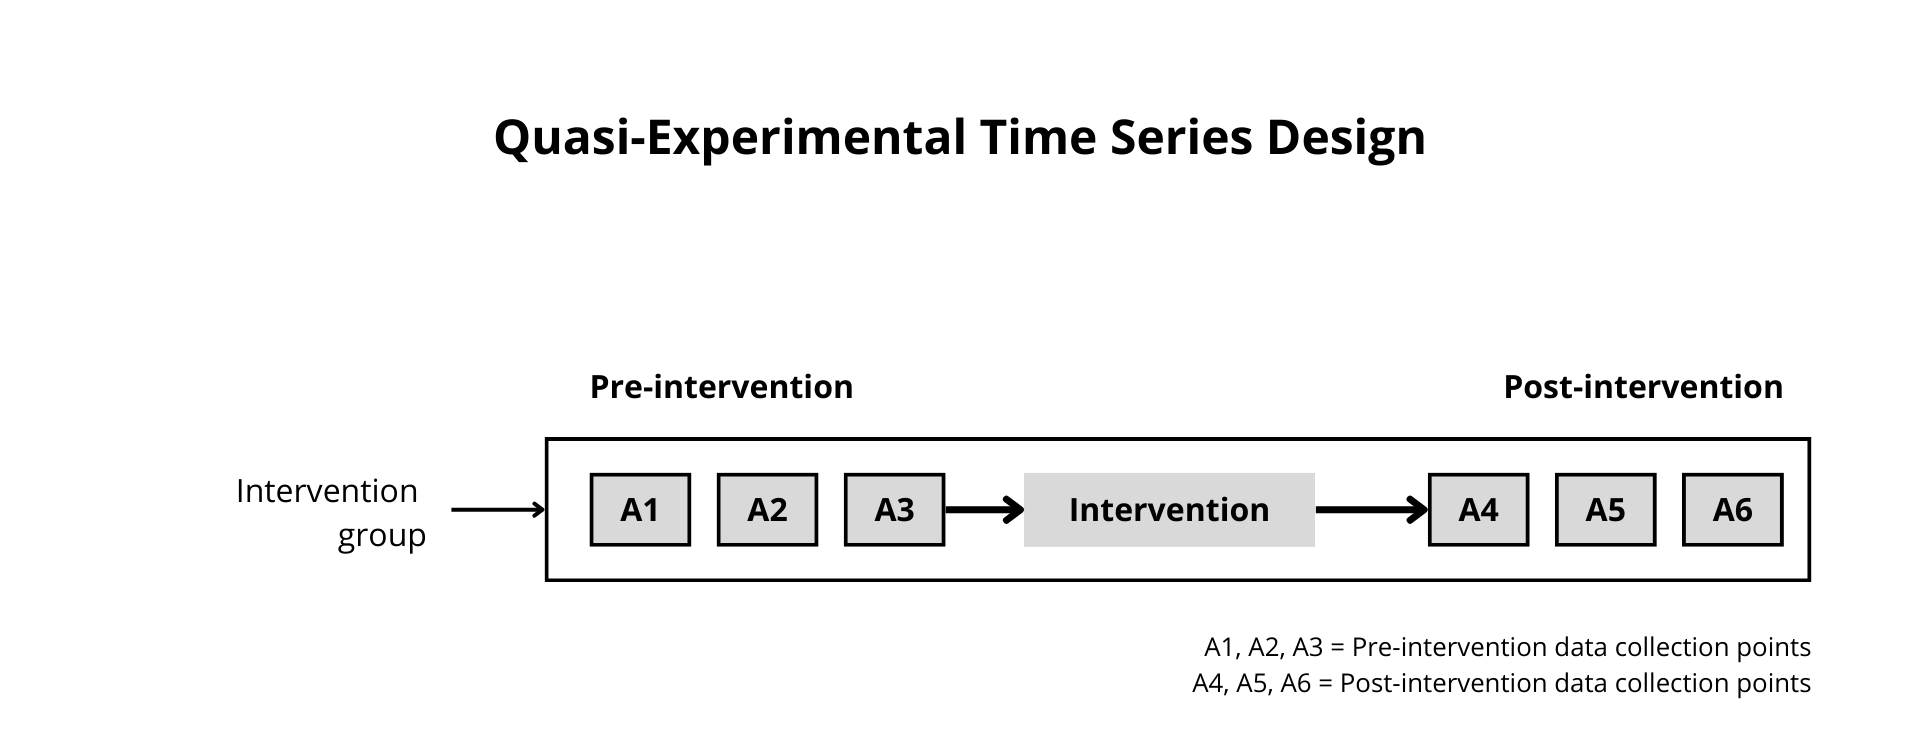 Figure 7. Time-series design. Adapted from https://www.k4health.org/toolkits/measuring-success/types-evaluation-designs